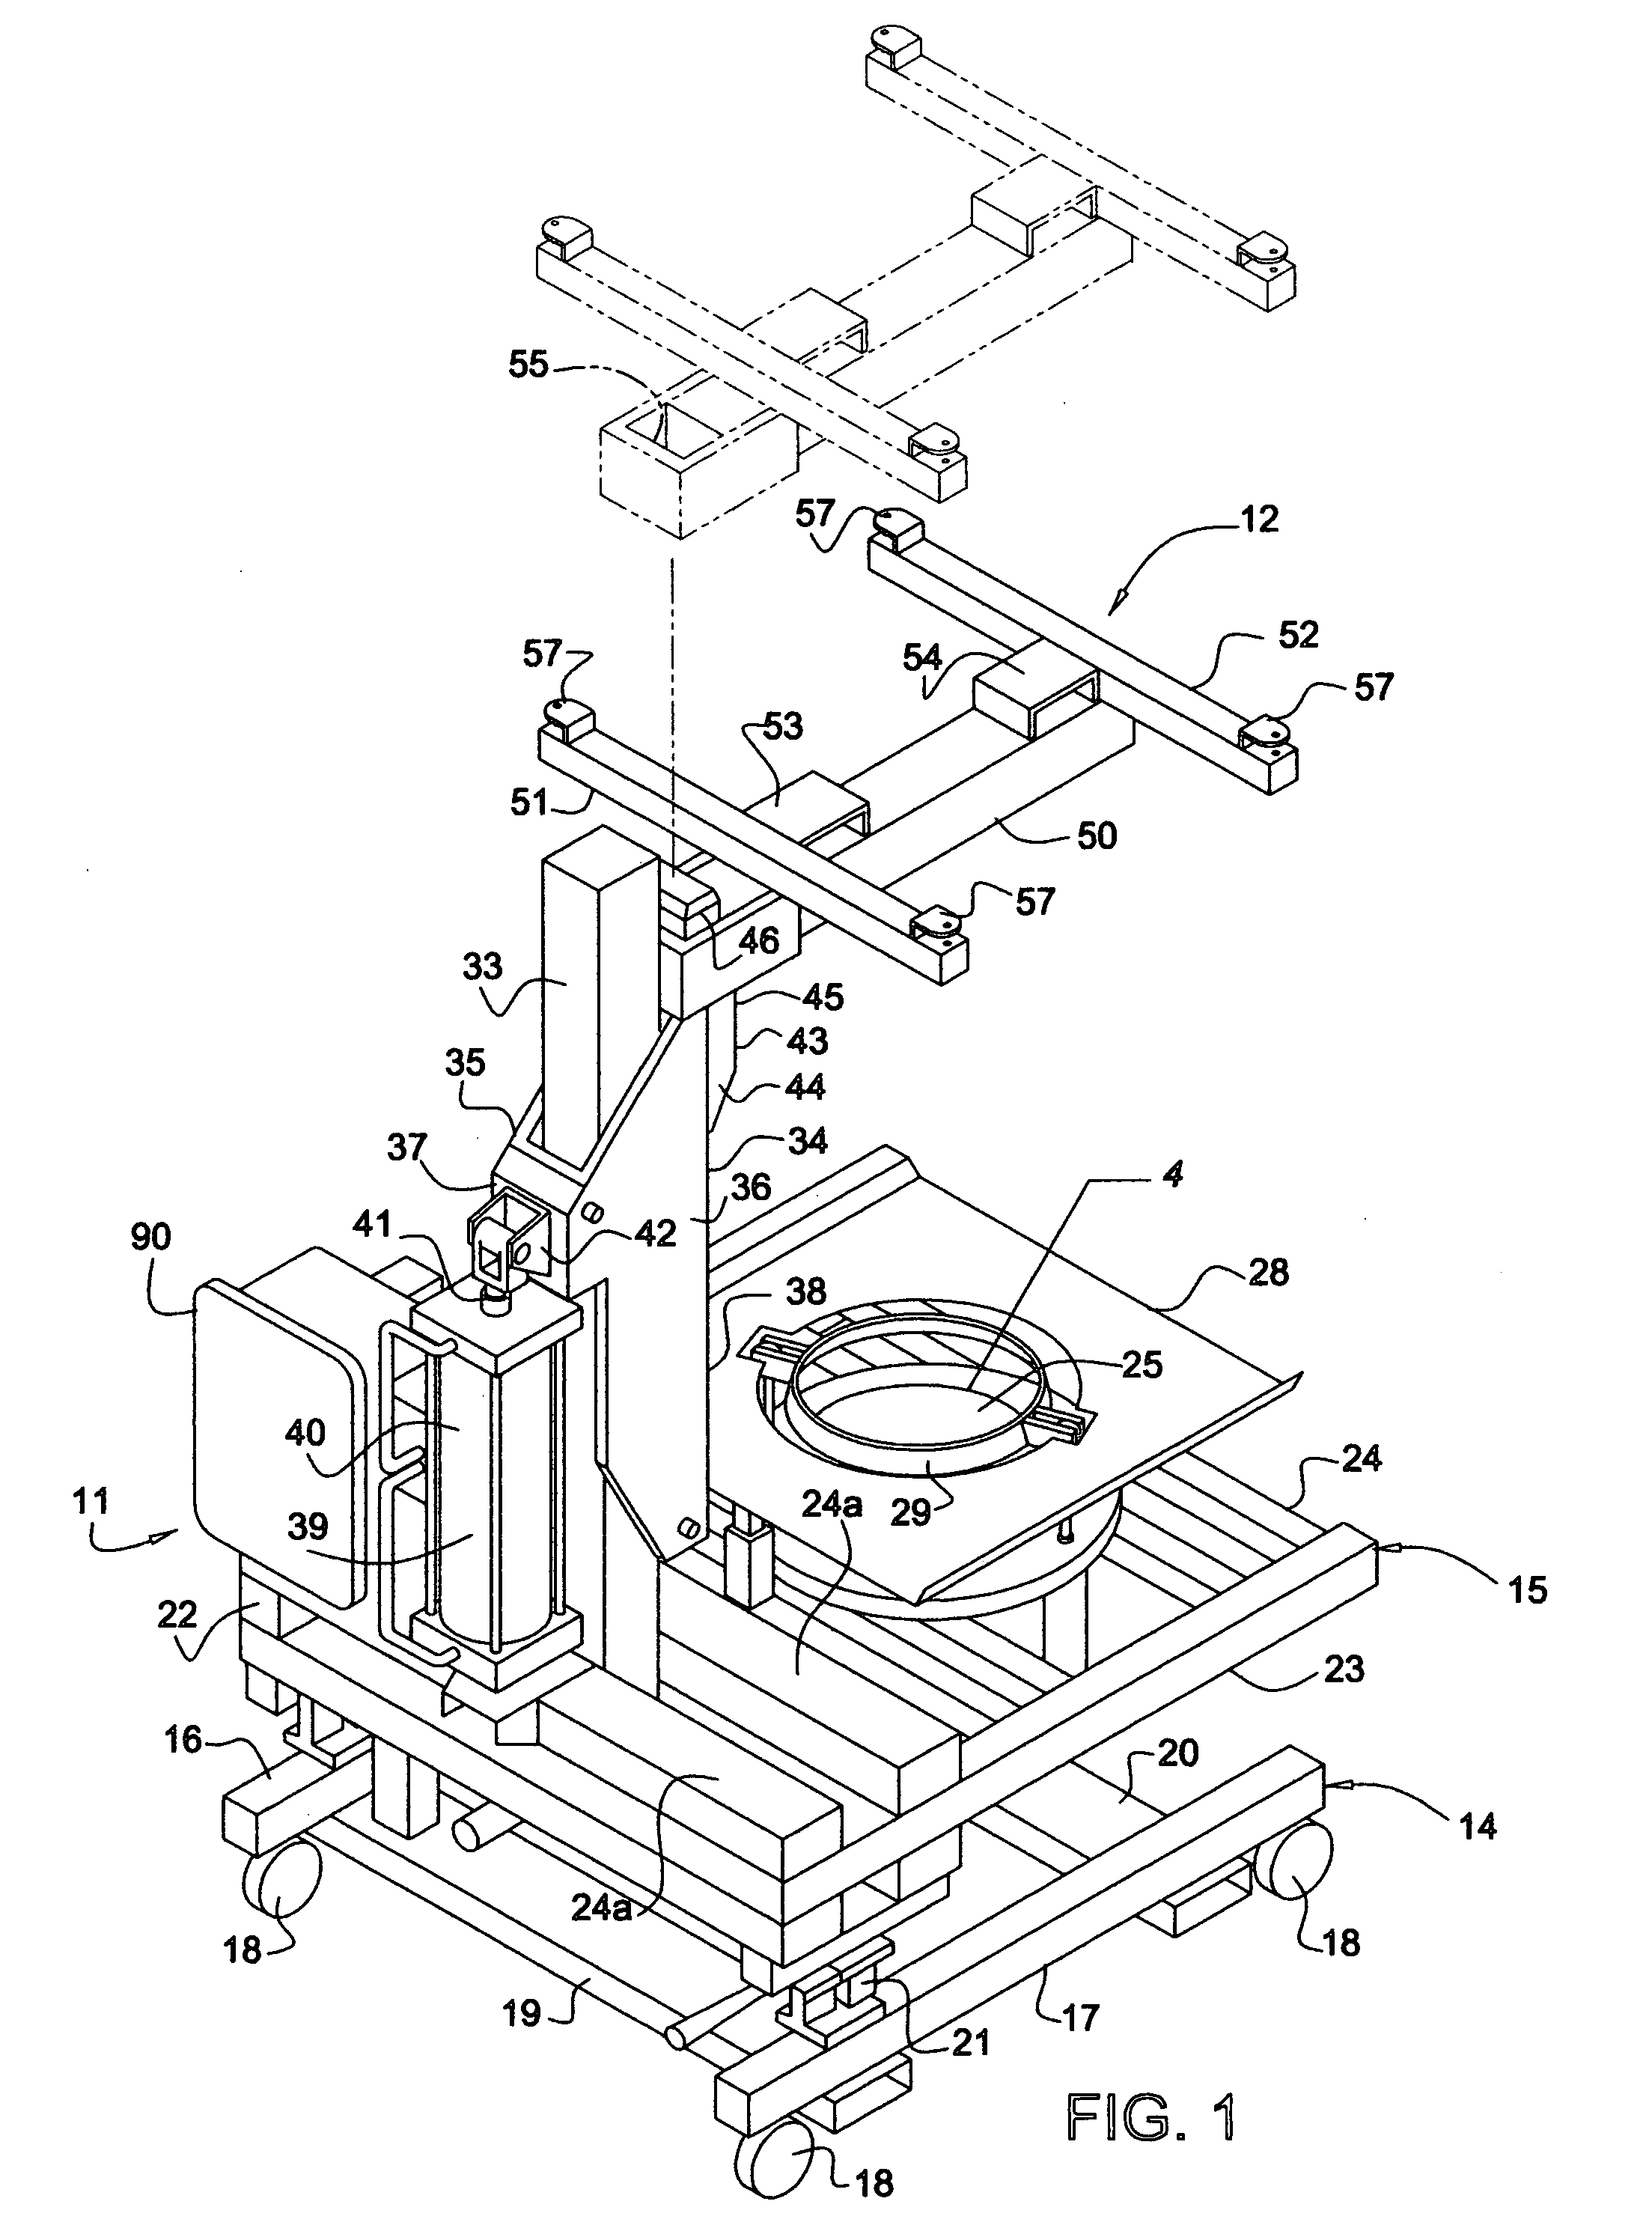 System and method for handling containers of bulk particulate materials